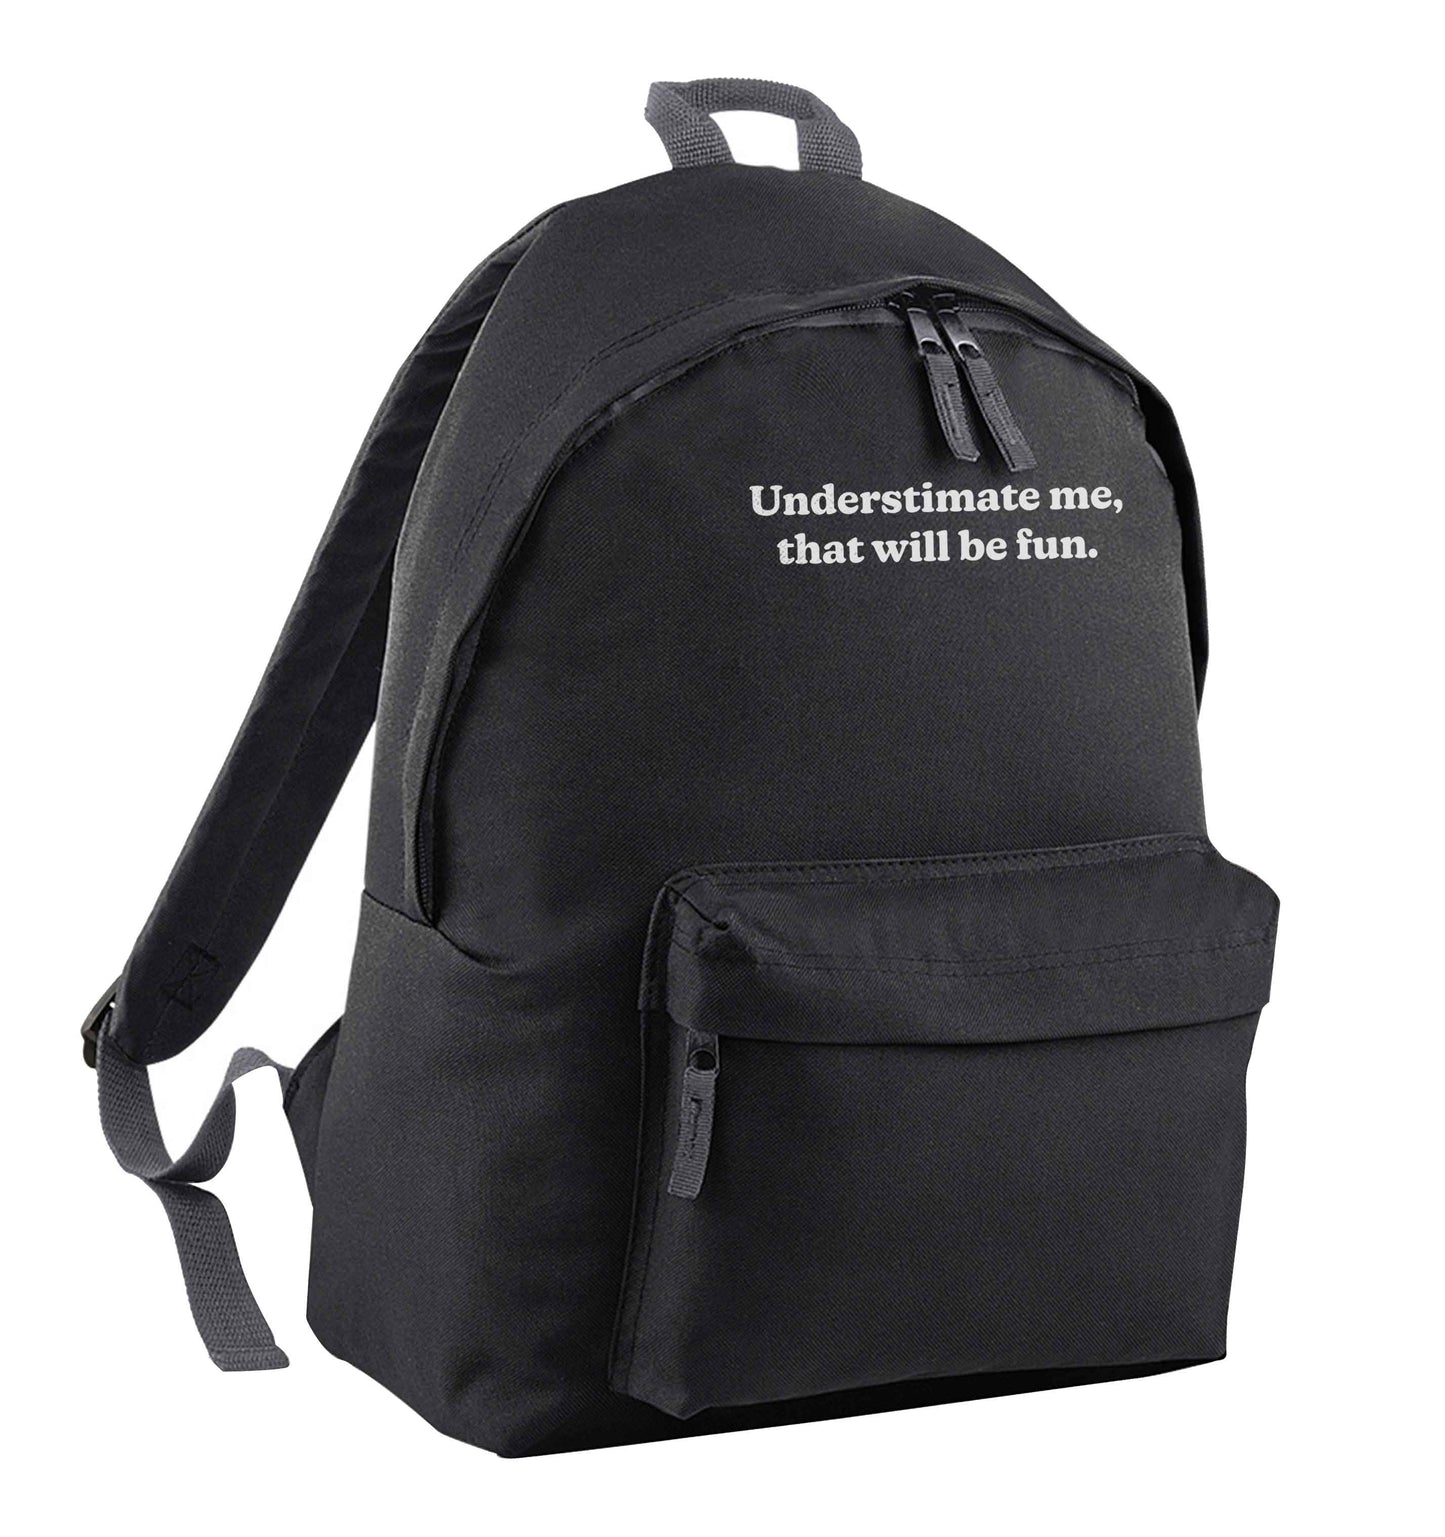 Underestimate me that will be fun black children's backpack